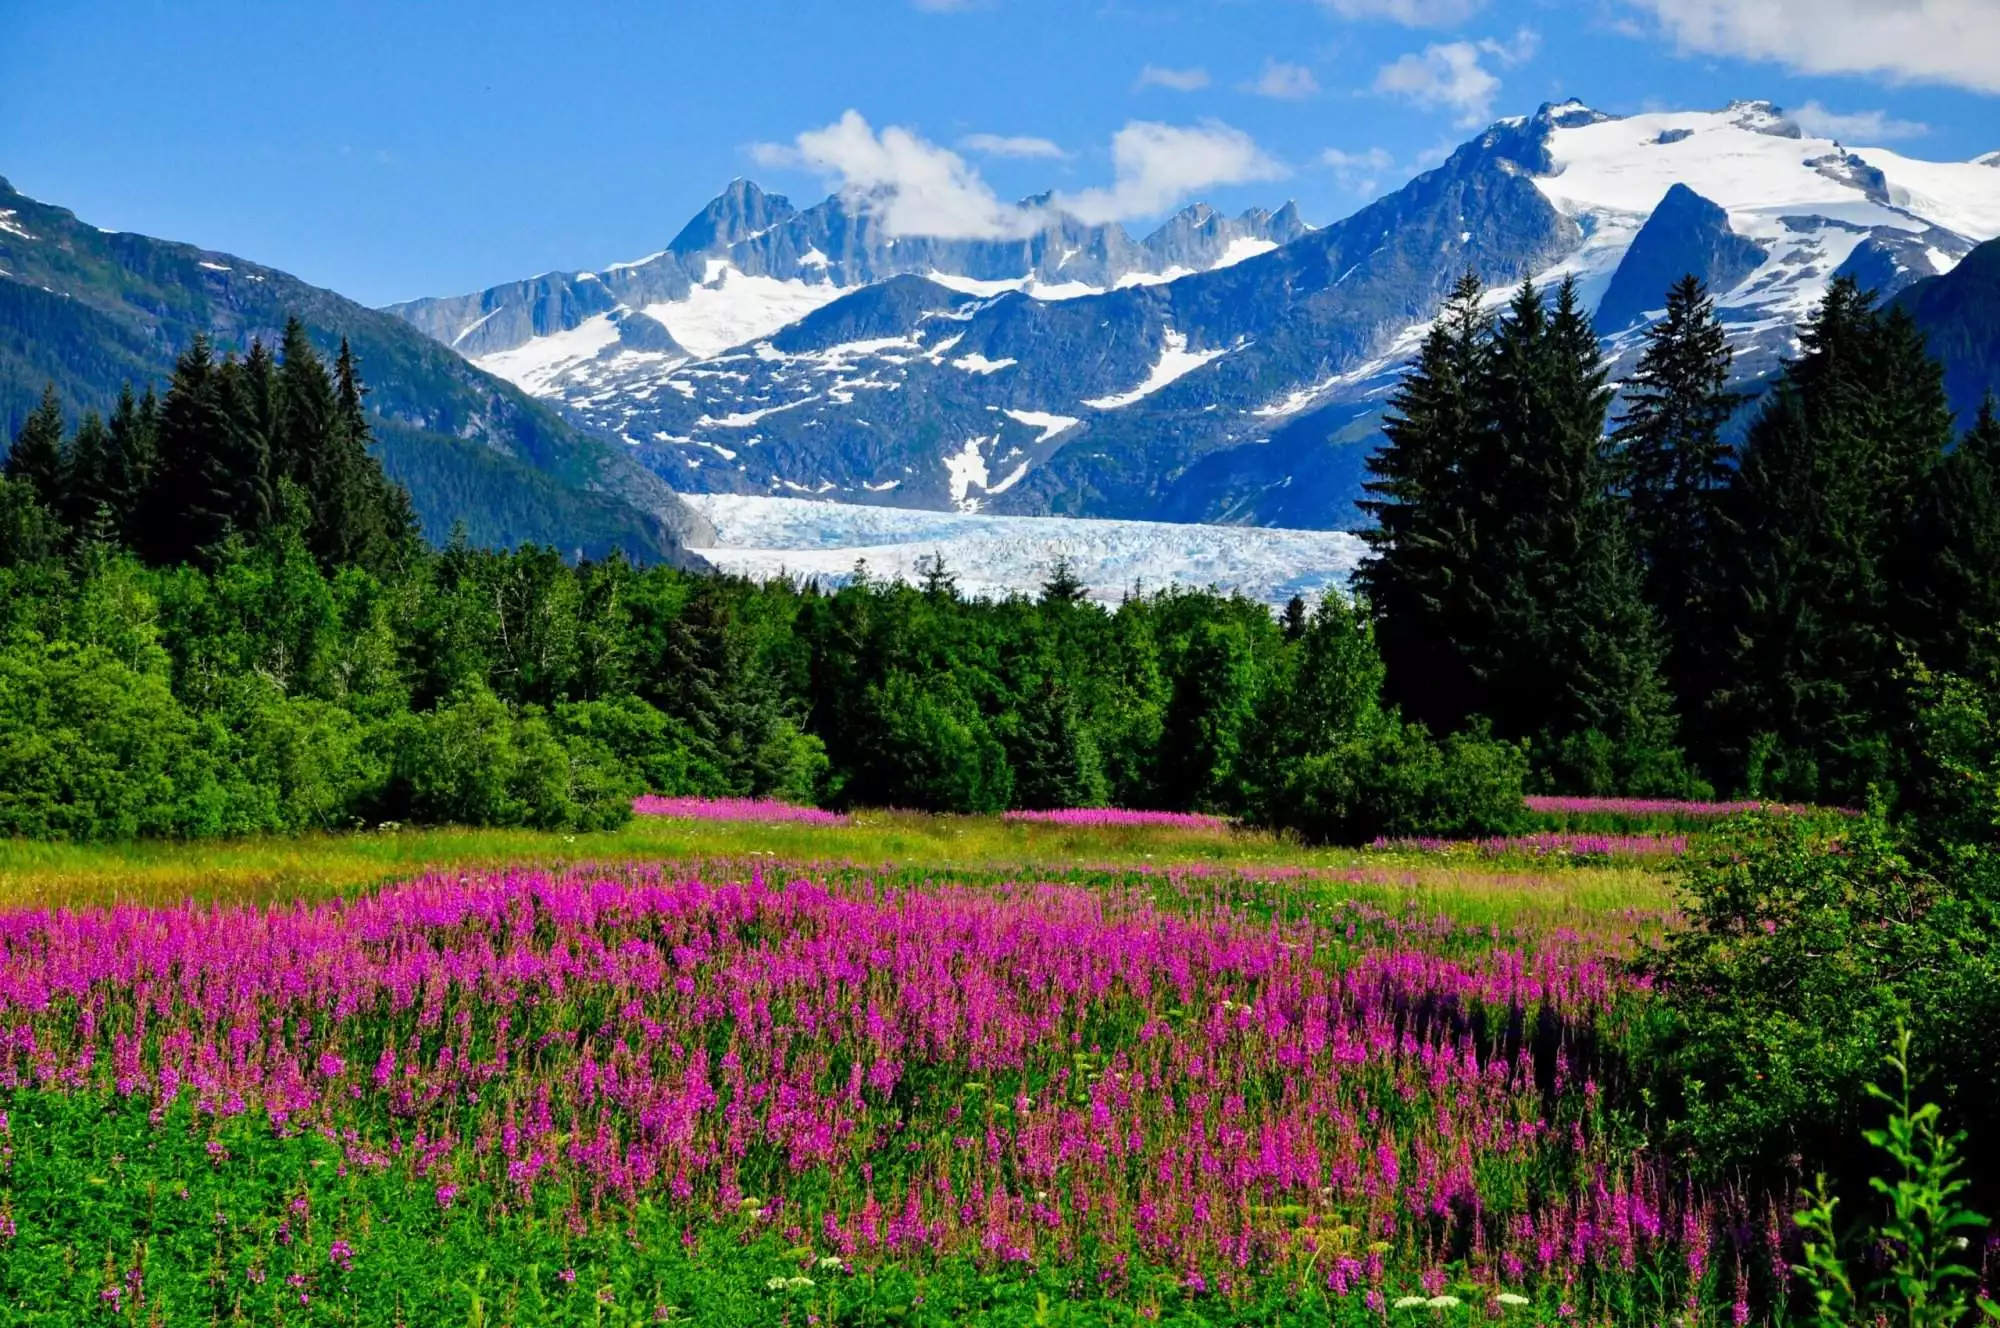 Alaska Tourism - 8 Best Places to See! 2